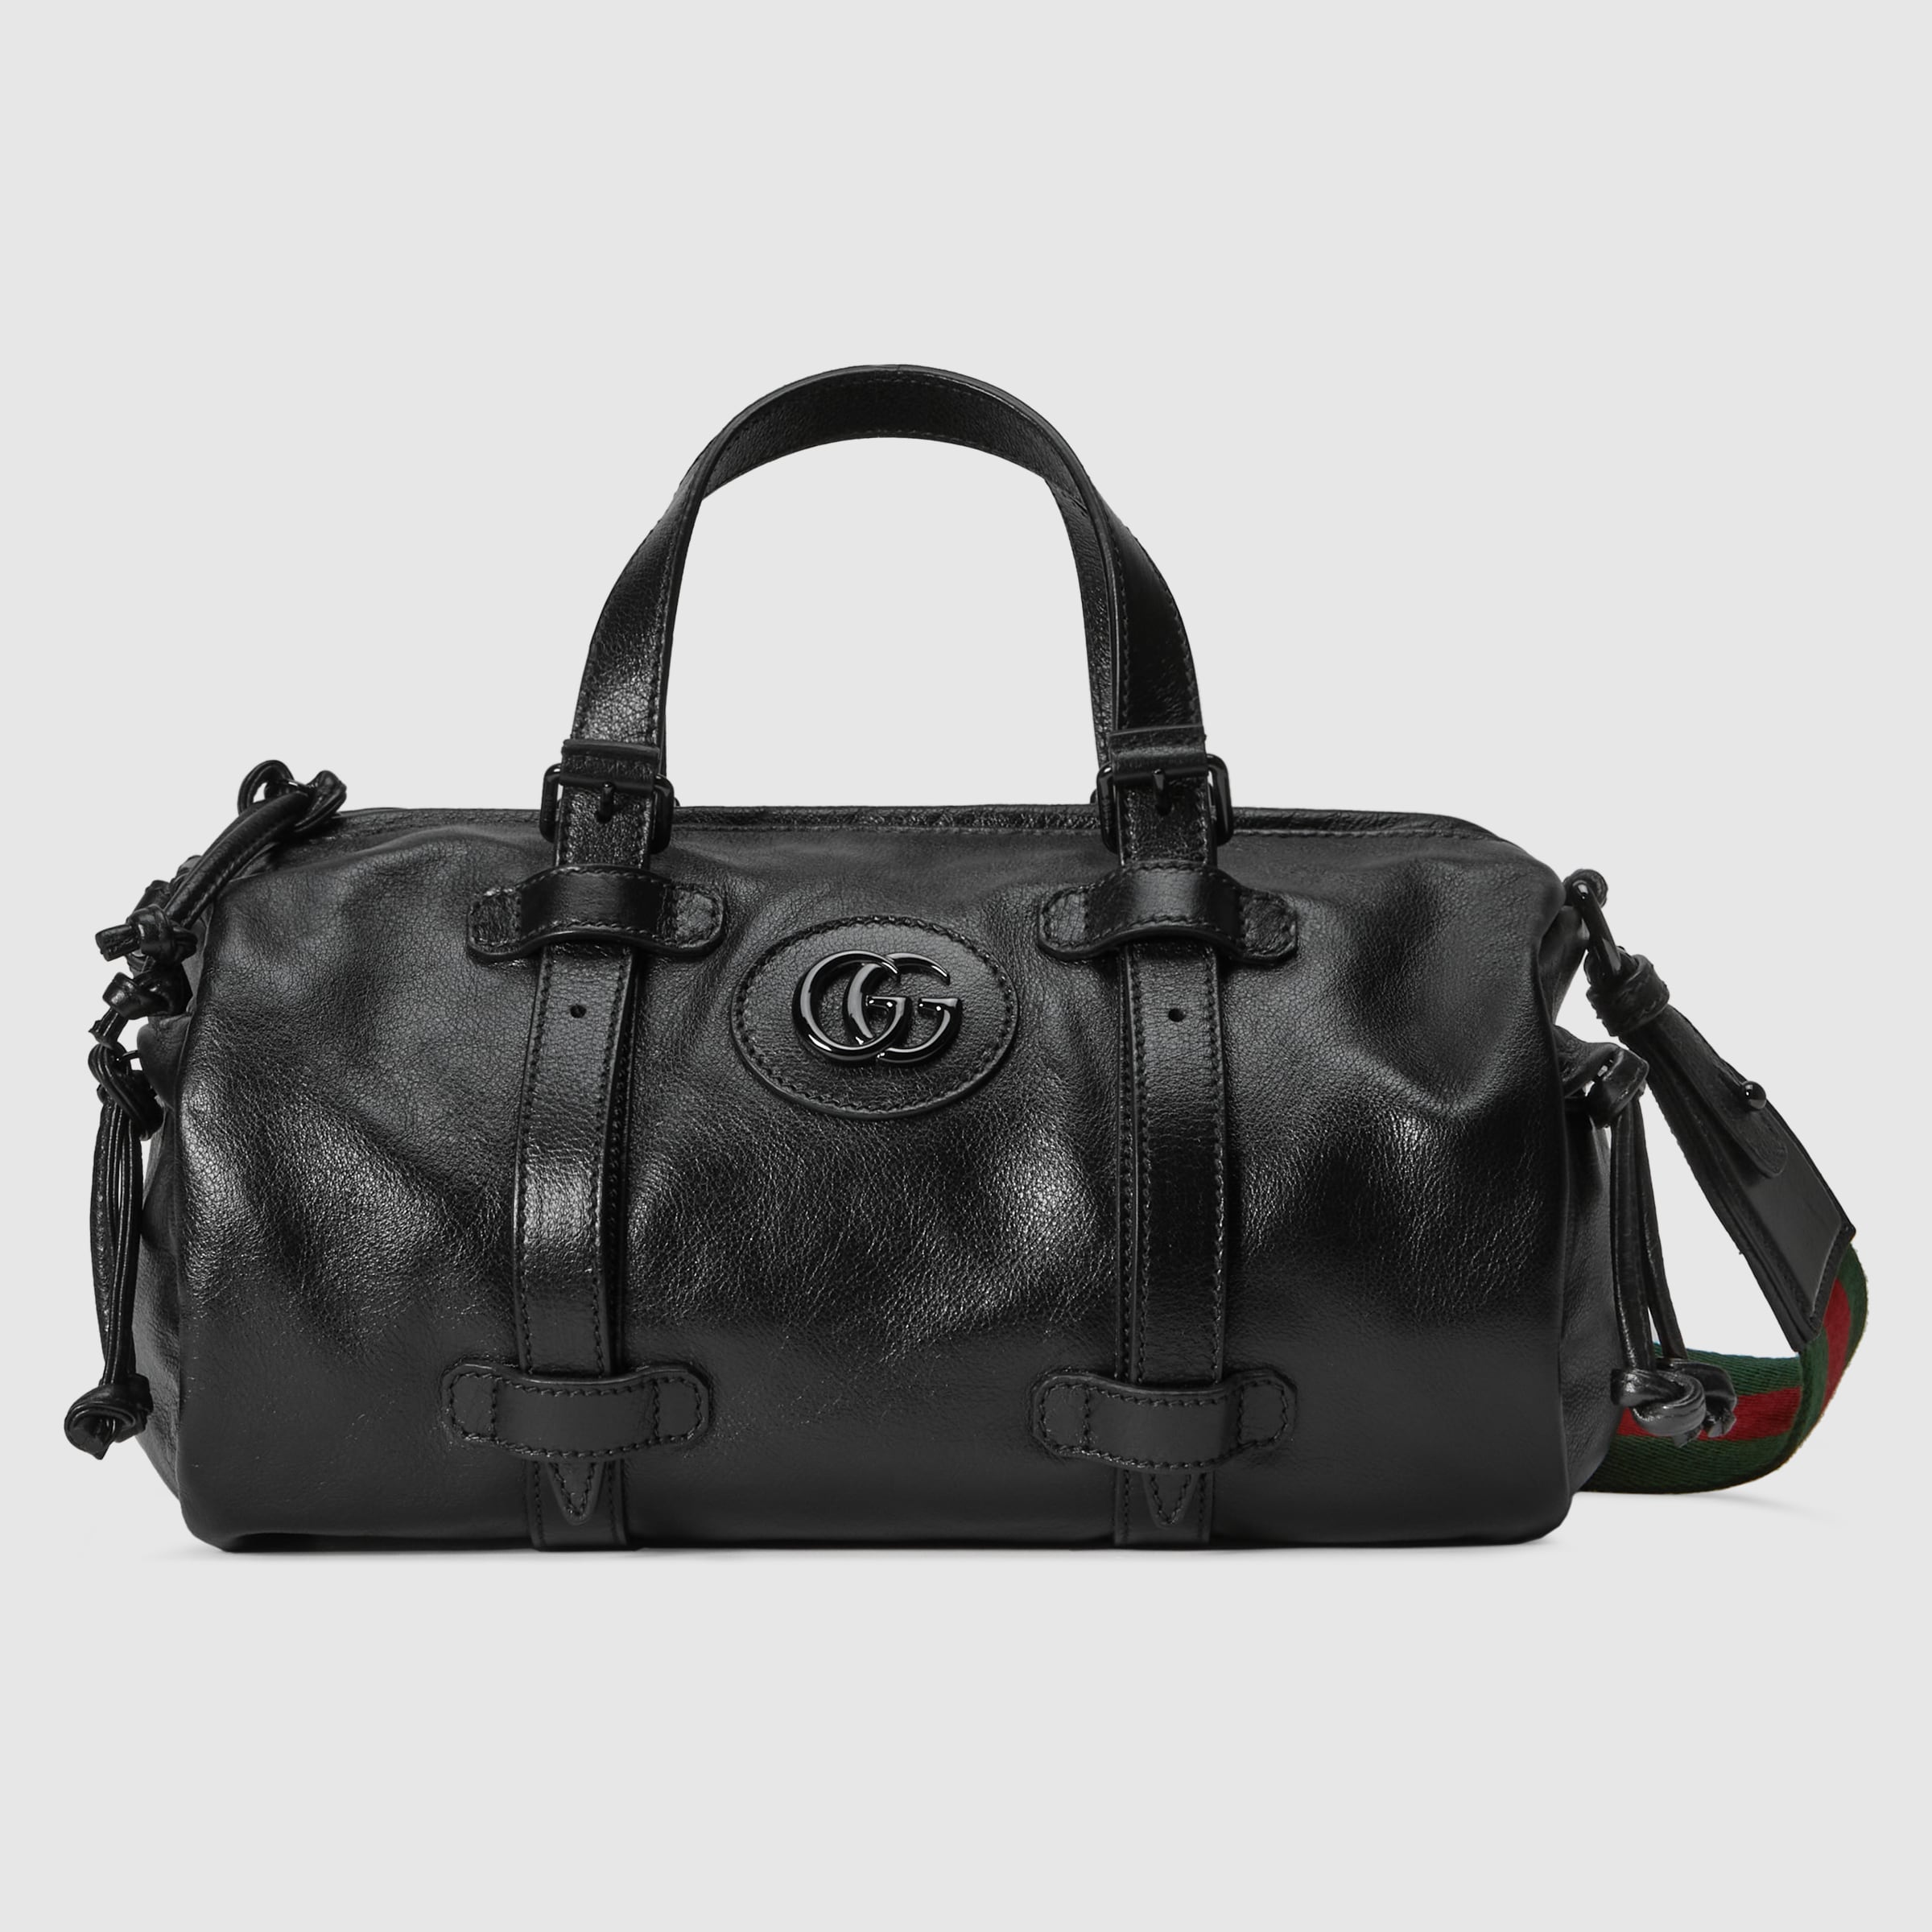 Gucci small duffle bag with tonal double g